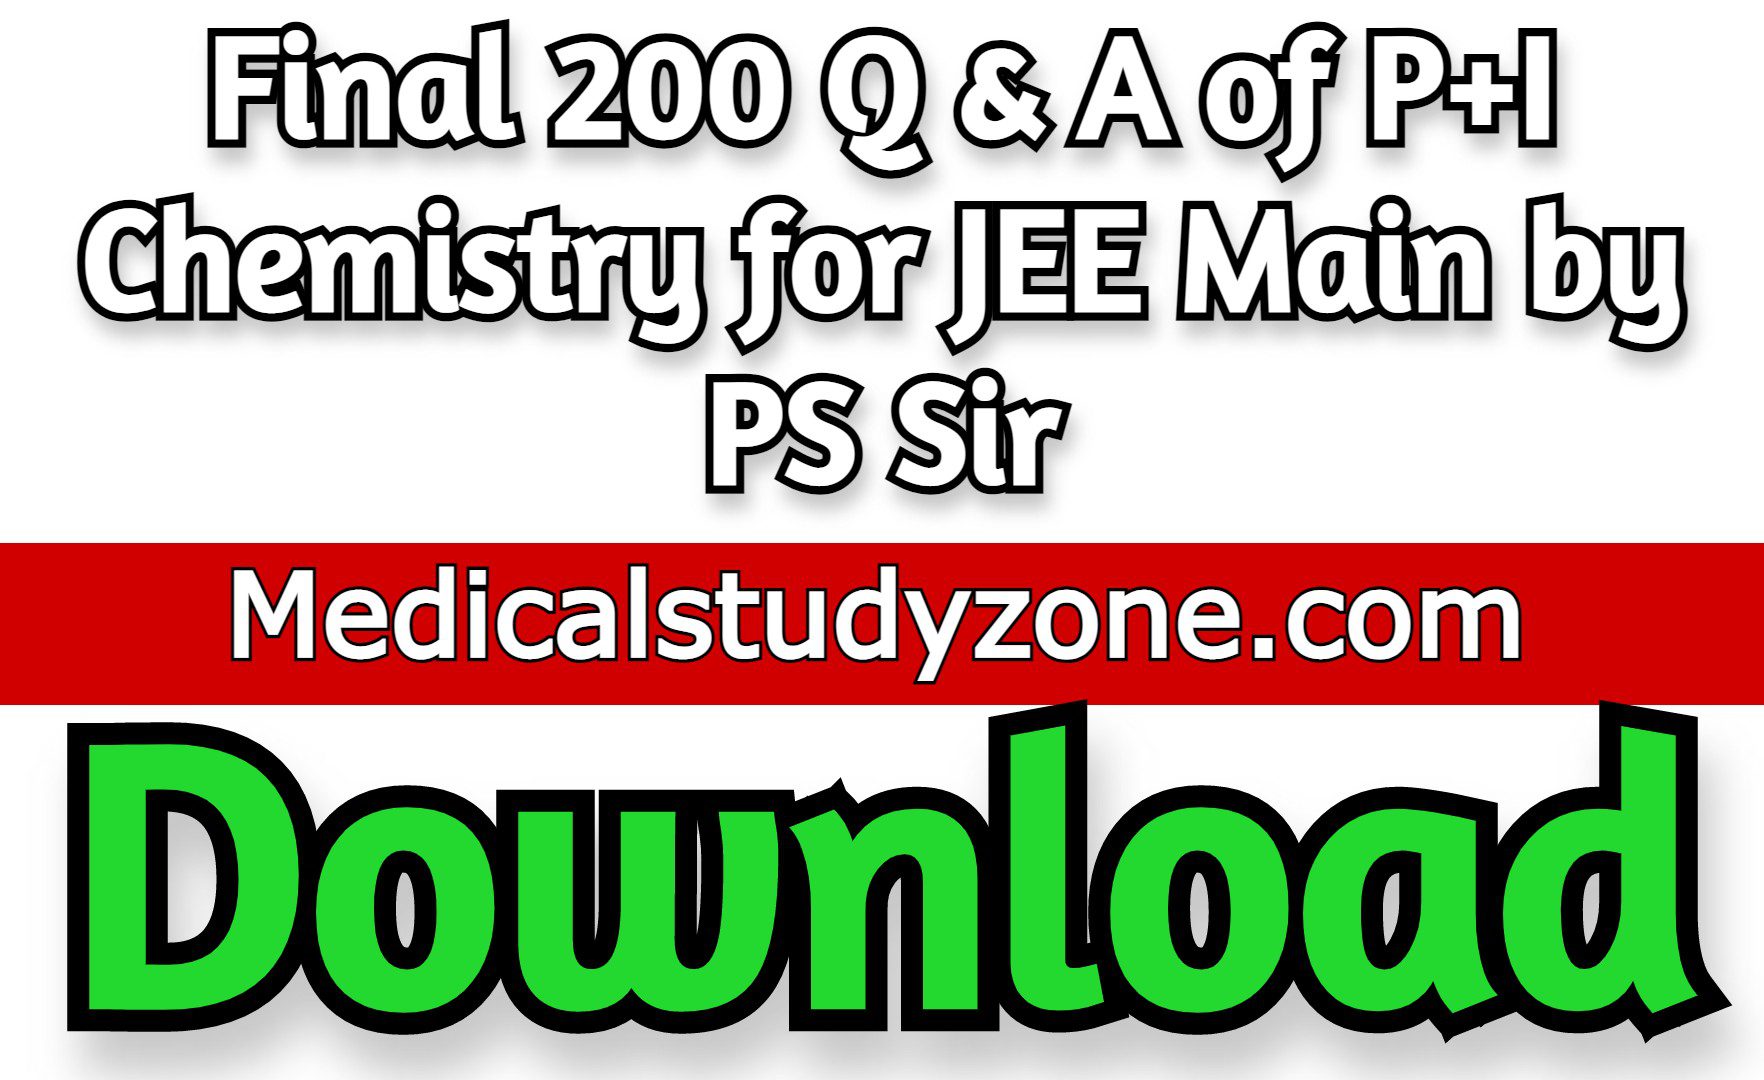 Final 200 Q & A of P+I Chemistry for JEE Main by PS Sir Free Download